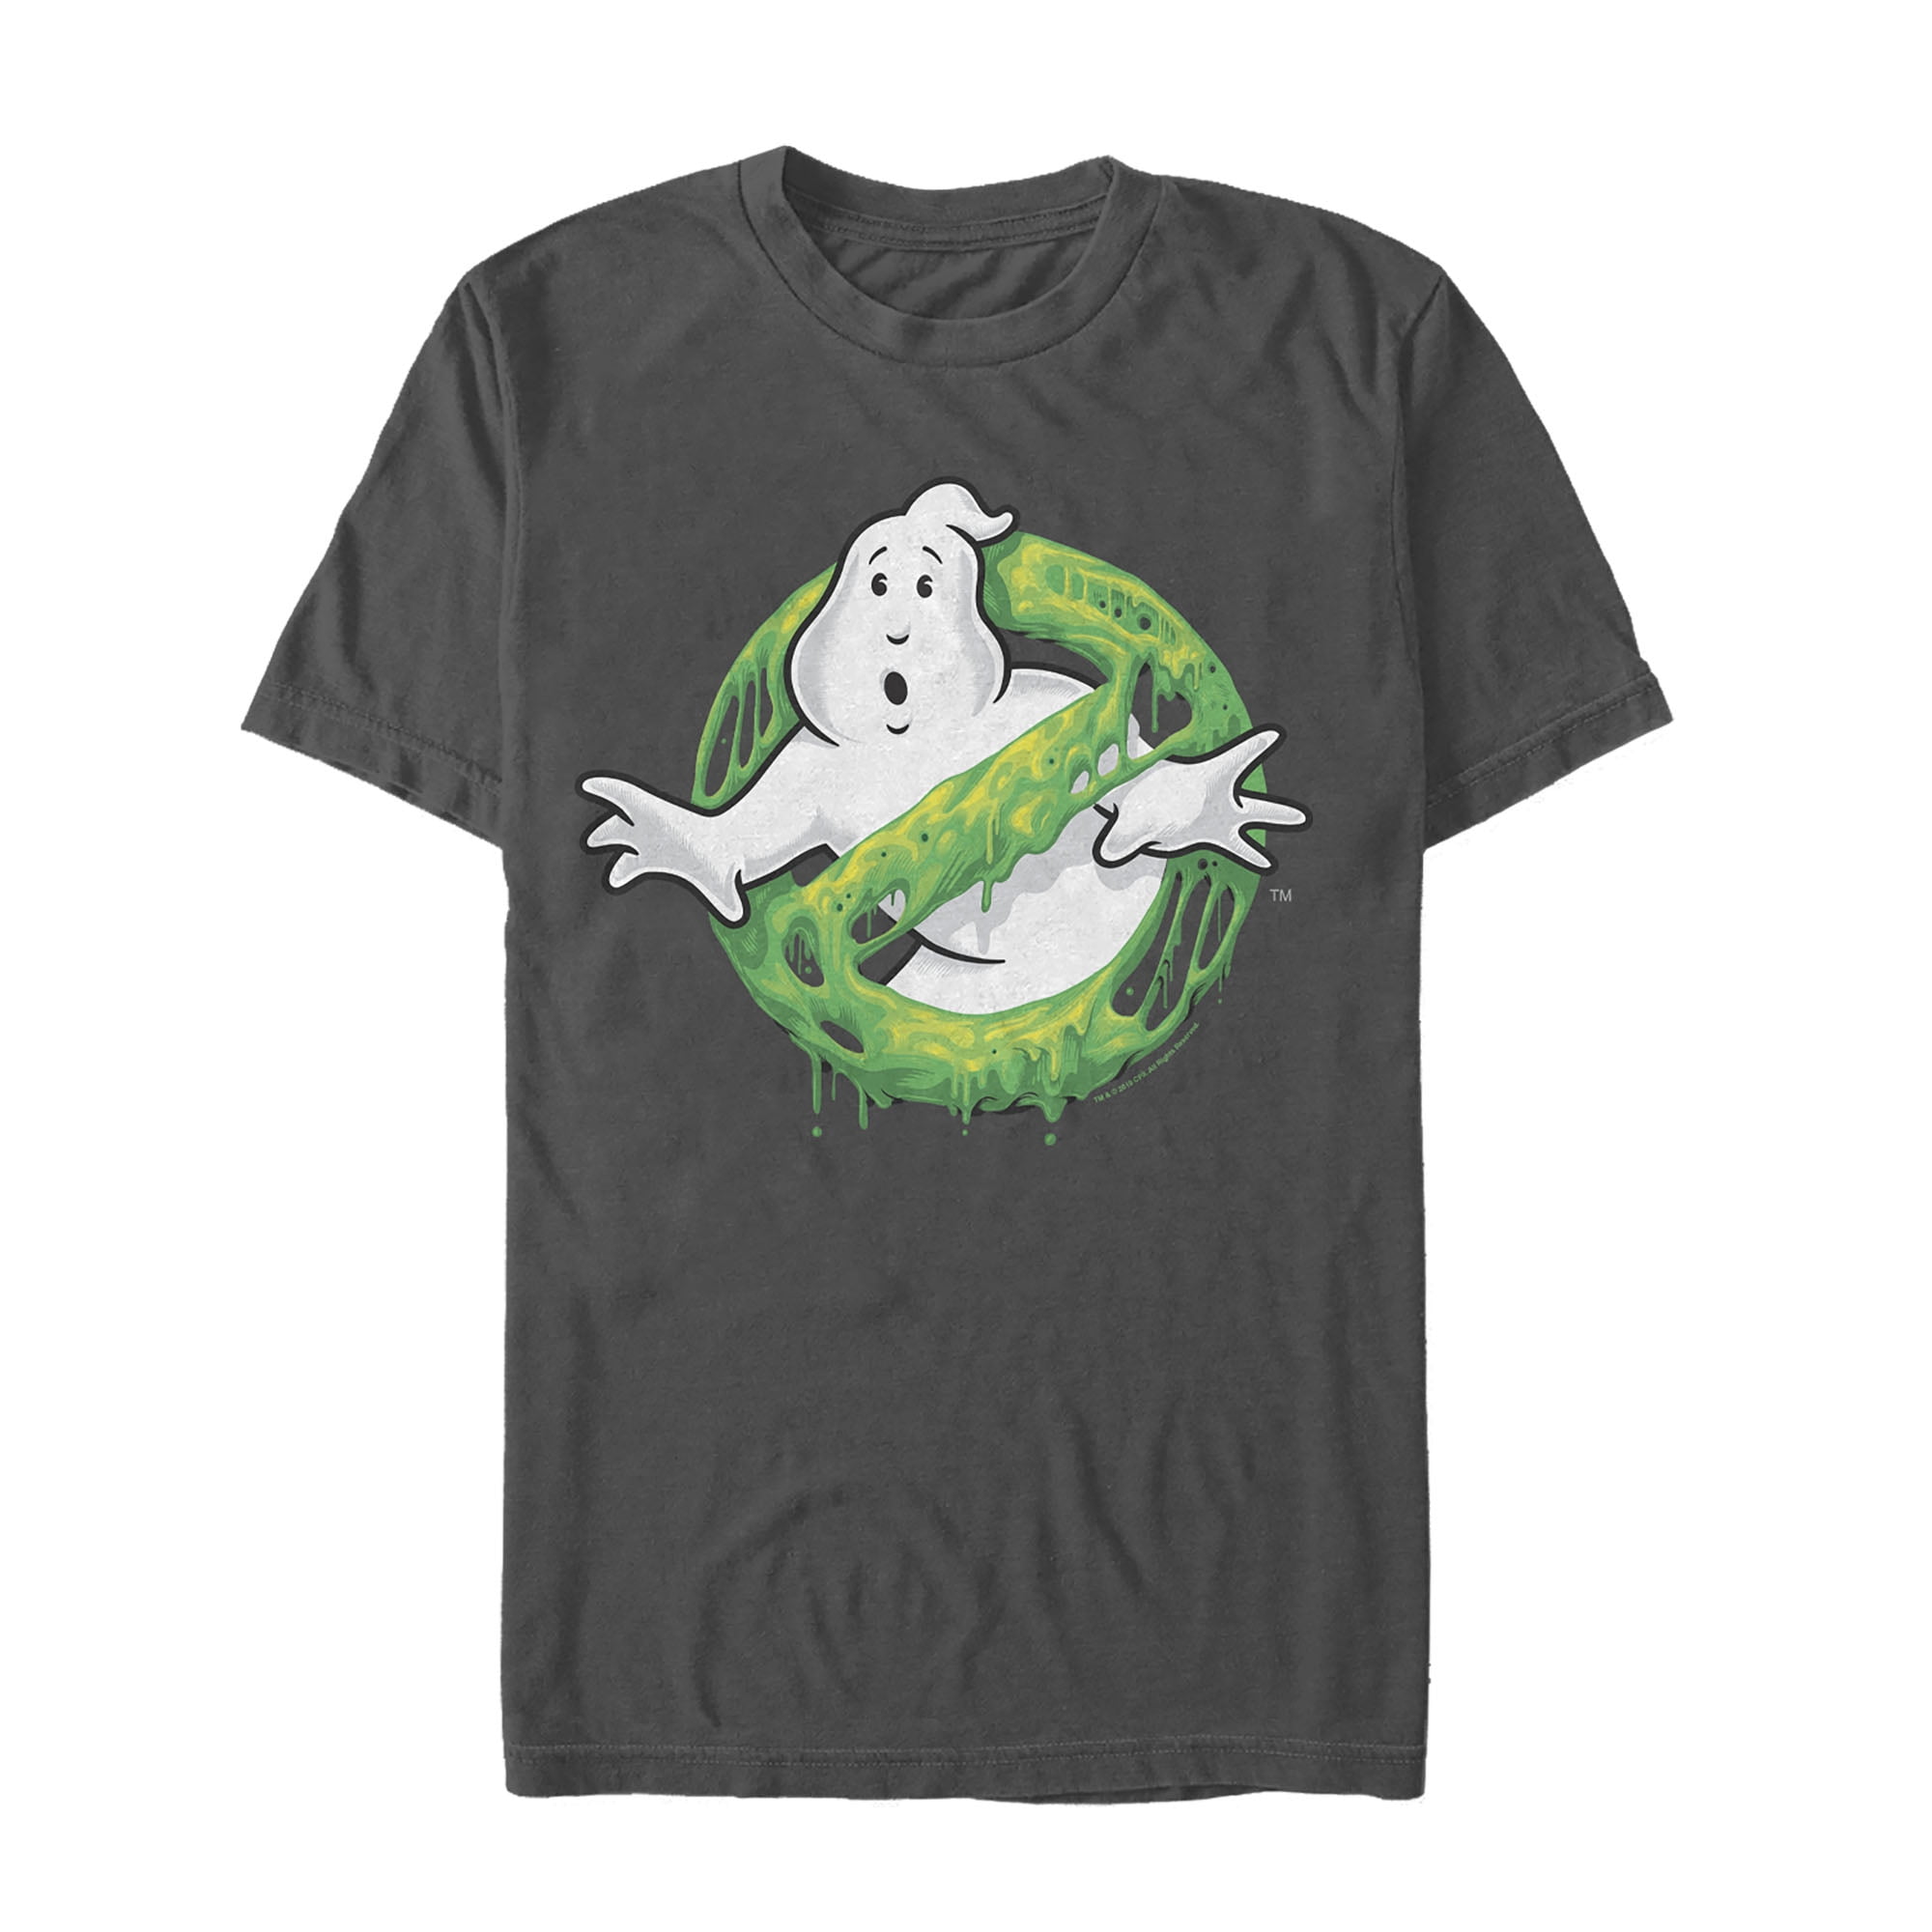 He slimed me - Mens T-Shirt 1984 Ghostbusters